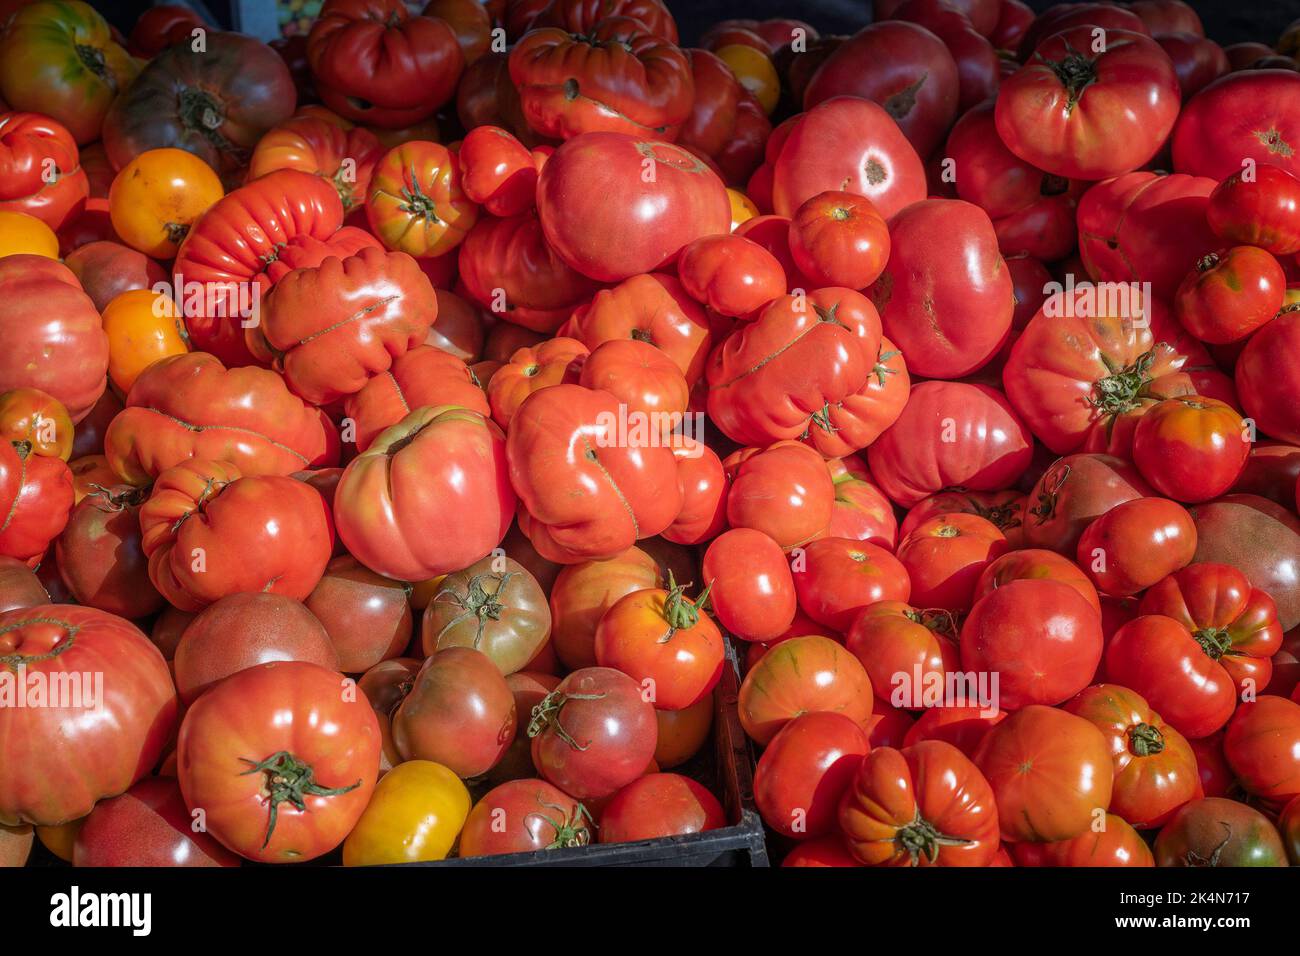 Close up of a pile of bright red Heirloom tomatoes. Stock Photo